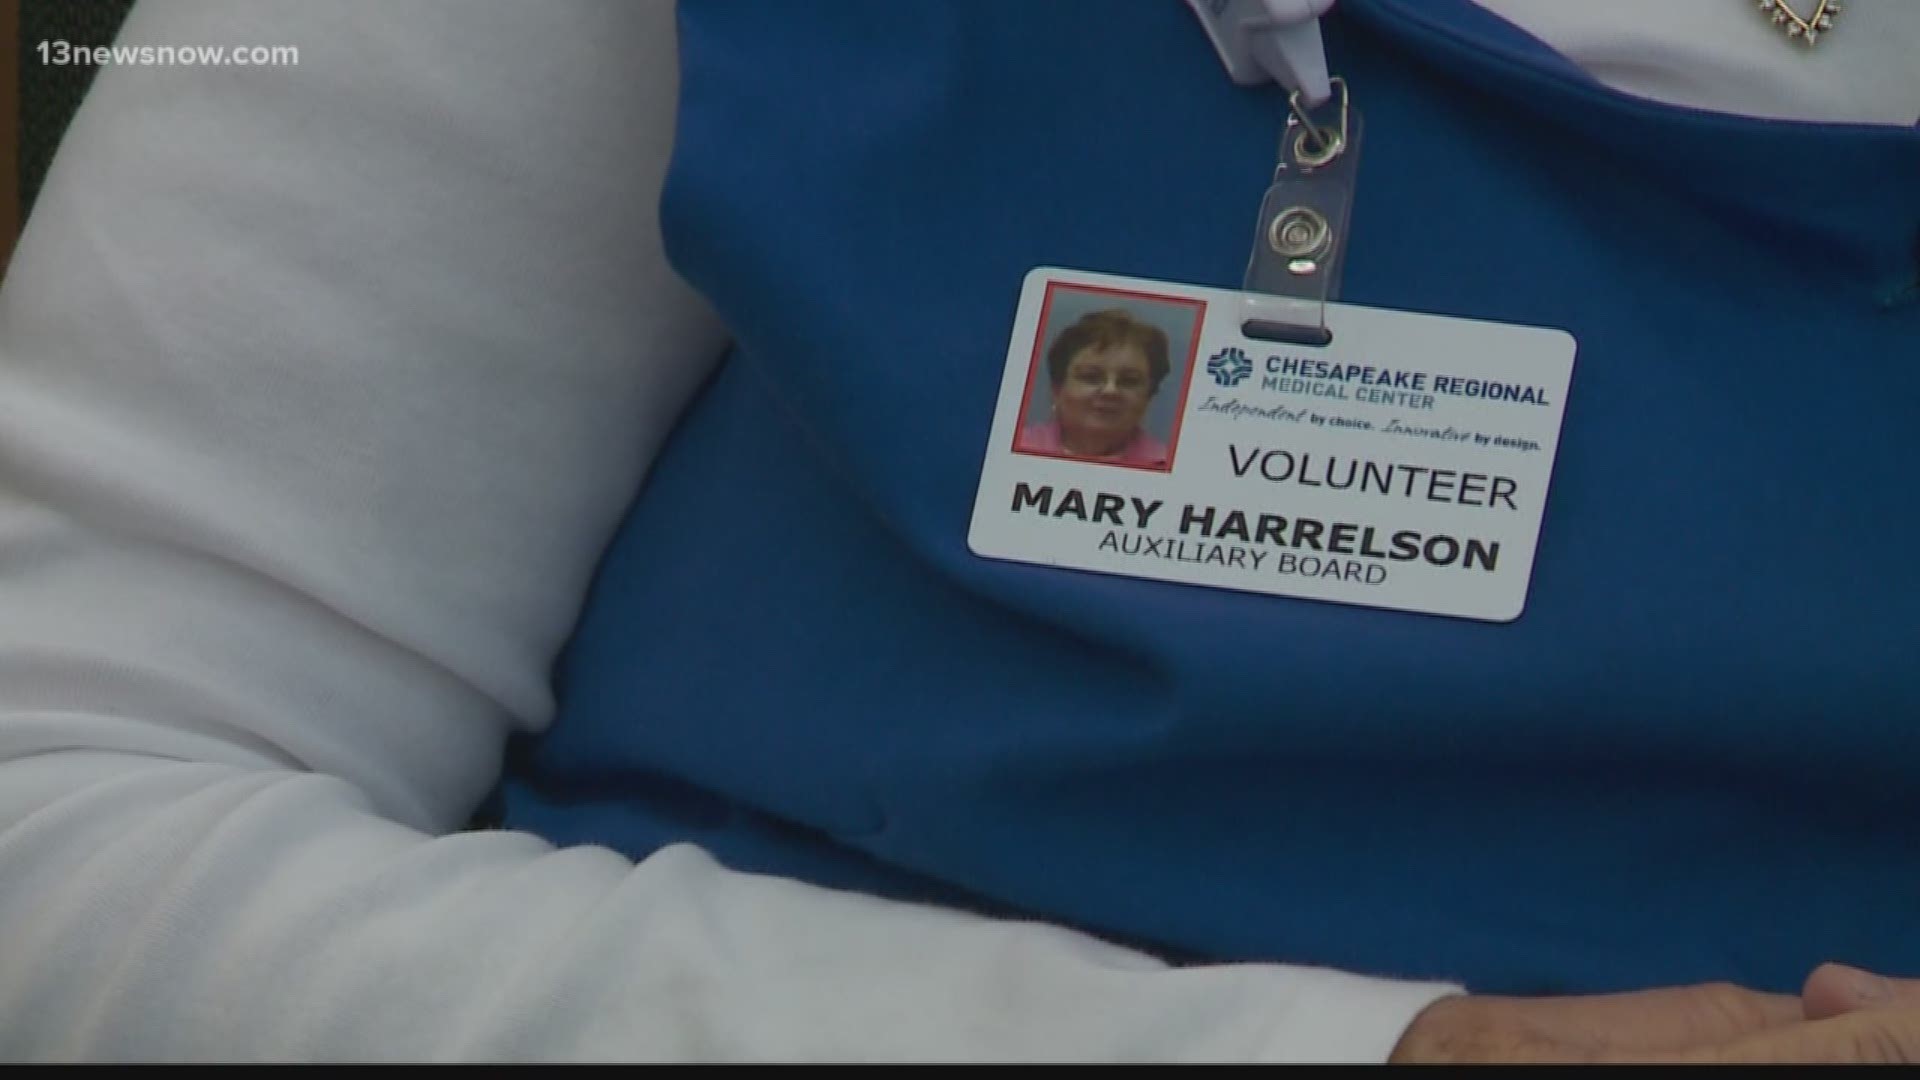 Mary Harrelson has volunteered at Chesapeake Regional Medical Center's information desk for more than two decades.